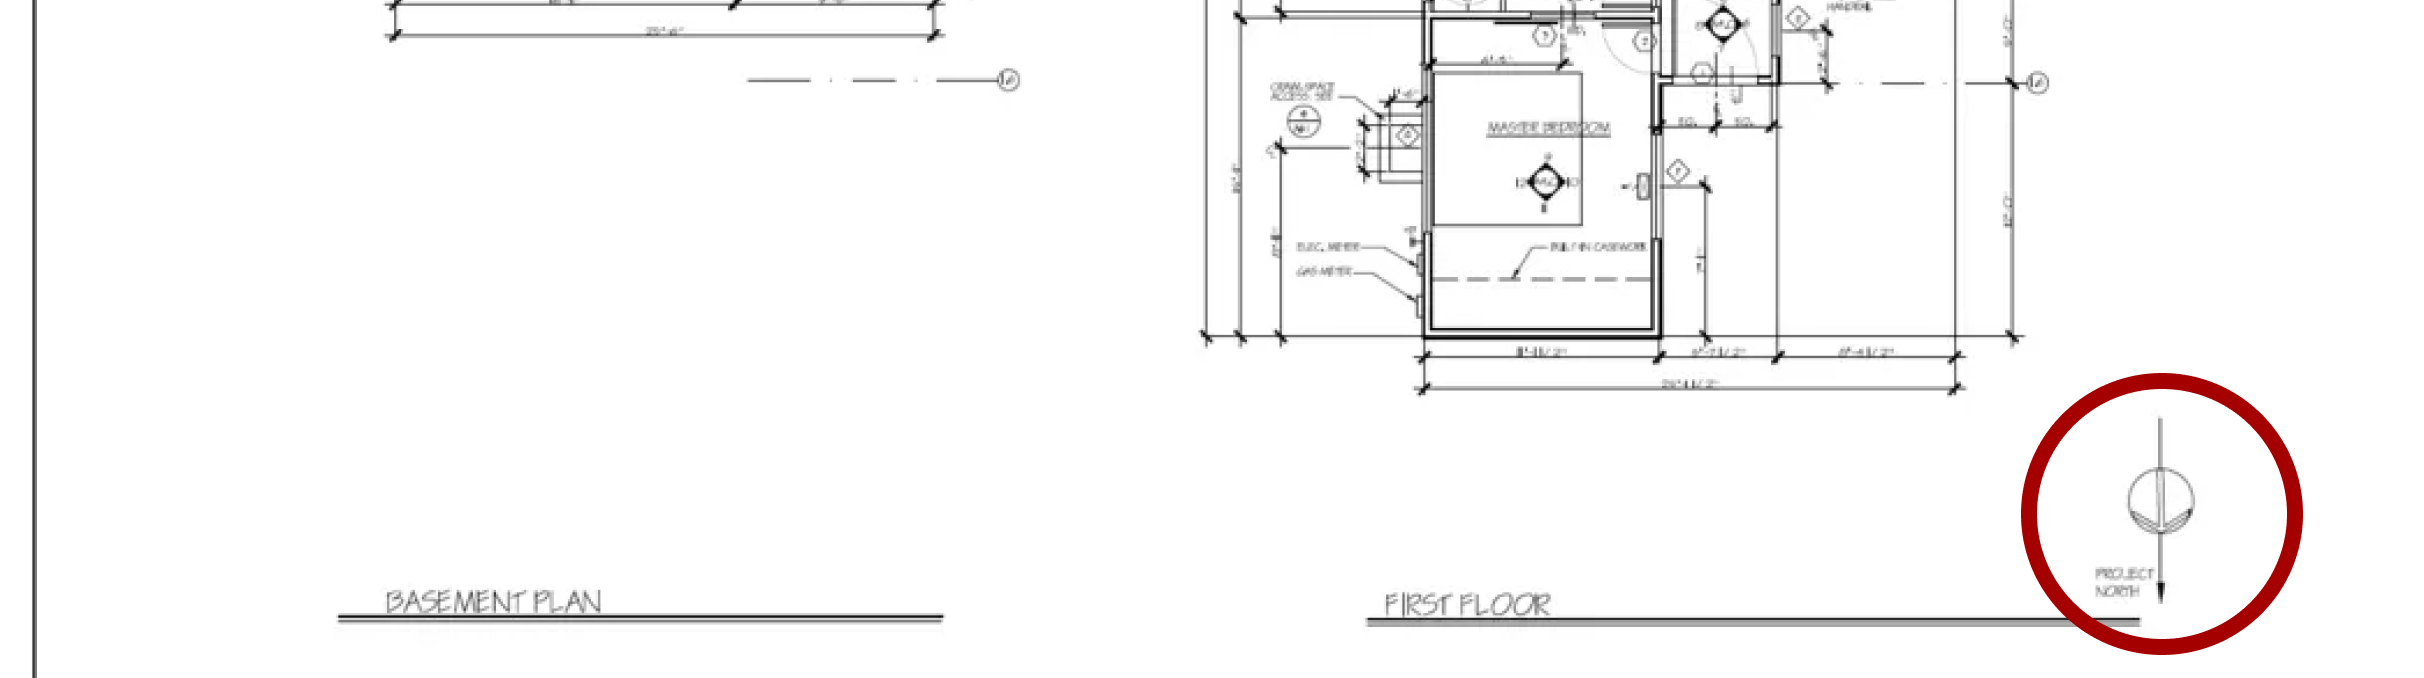 north star icon on a structural engineer drawing